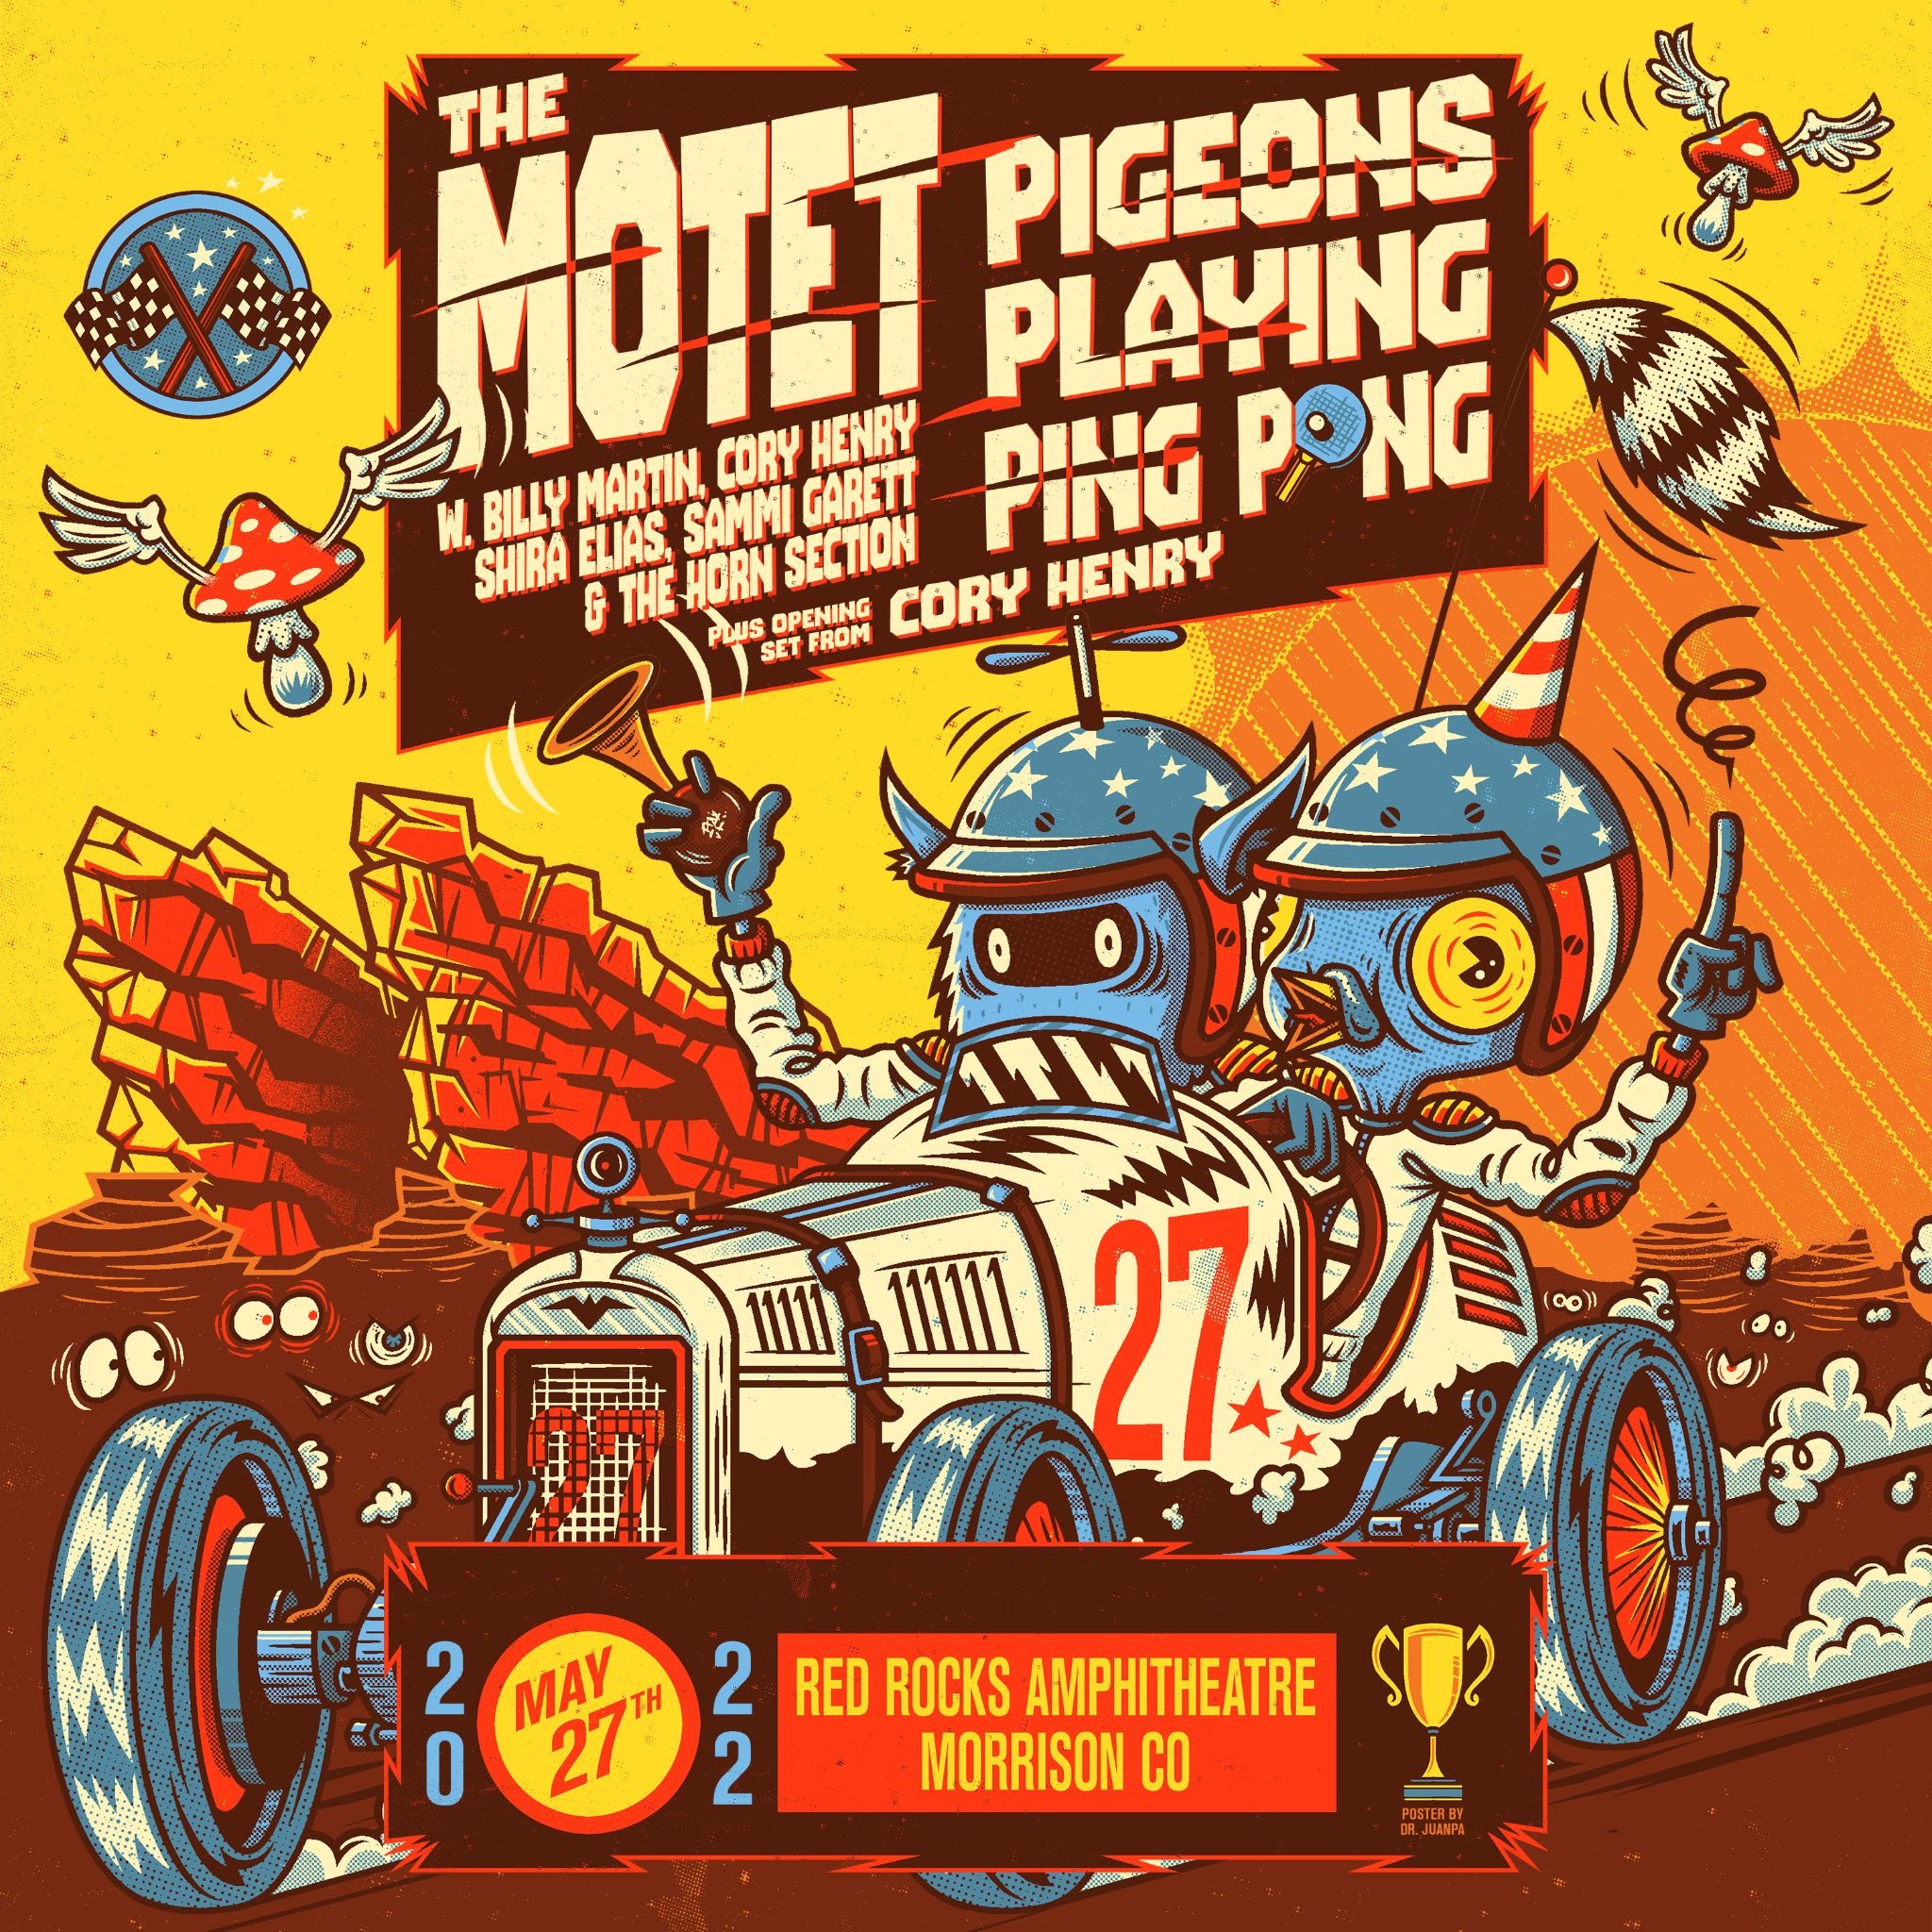 THE MOTET AND PIGEONS PLAYING PING PONG ANNOUNCE MAY CONCERT AT RED ROCKS AMPHITHEATER